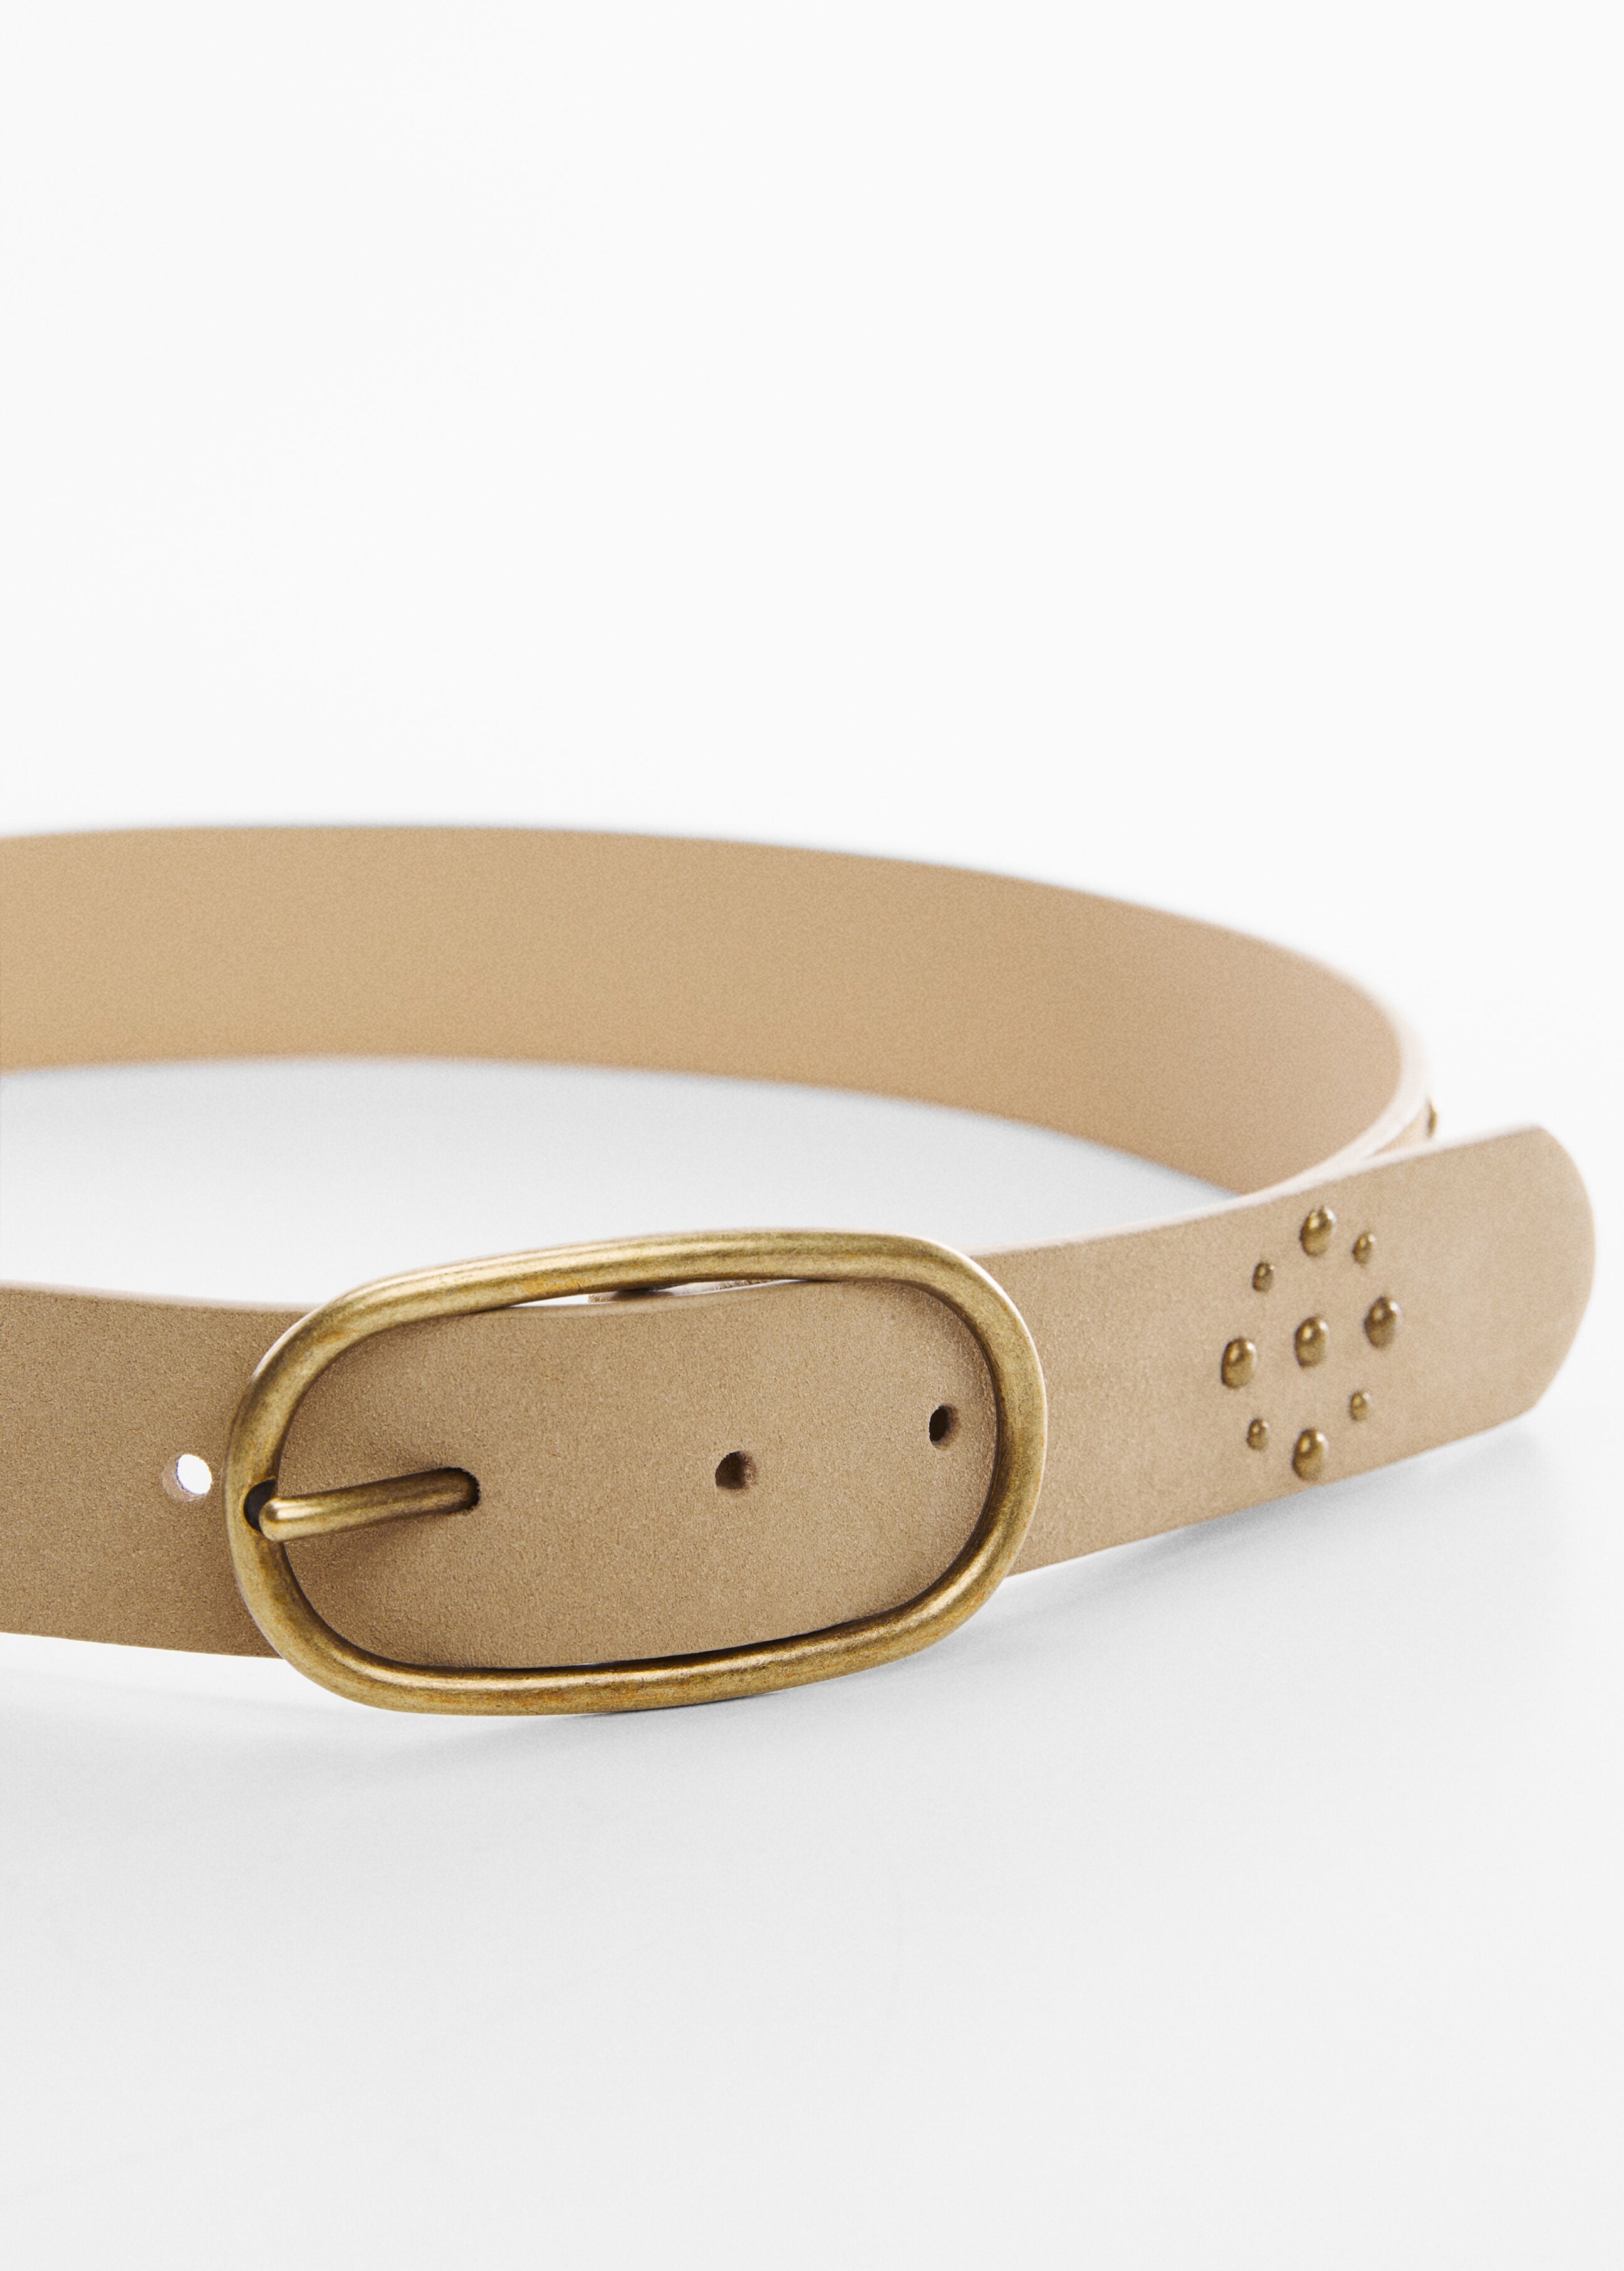 Studded belt - Details of the article 1